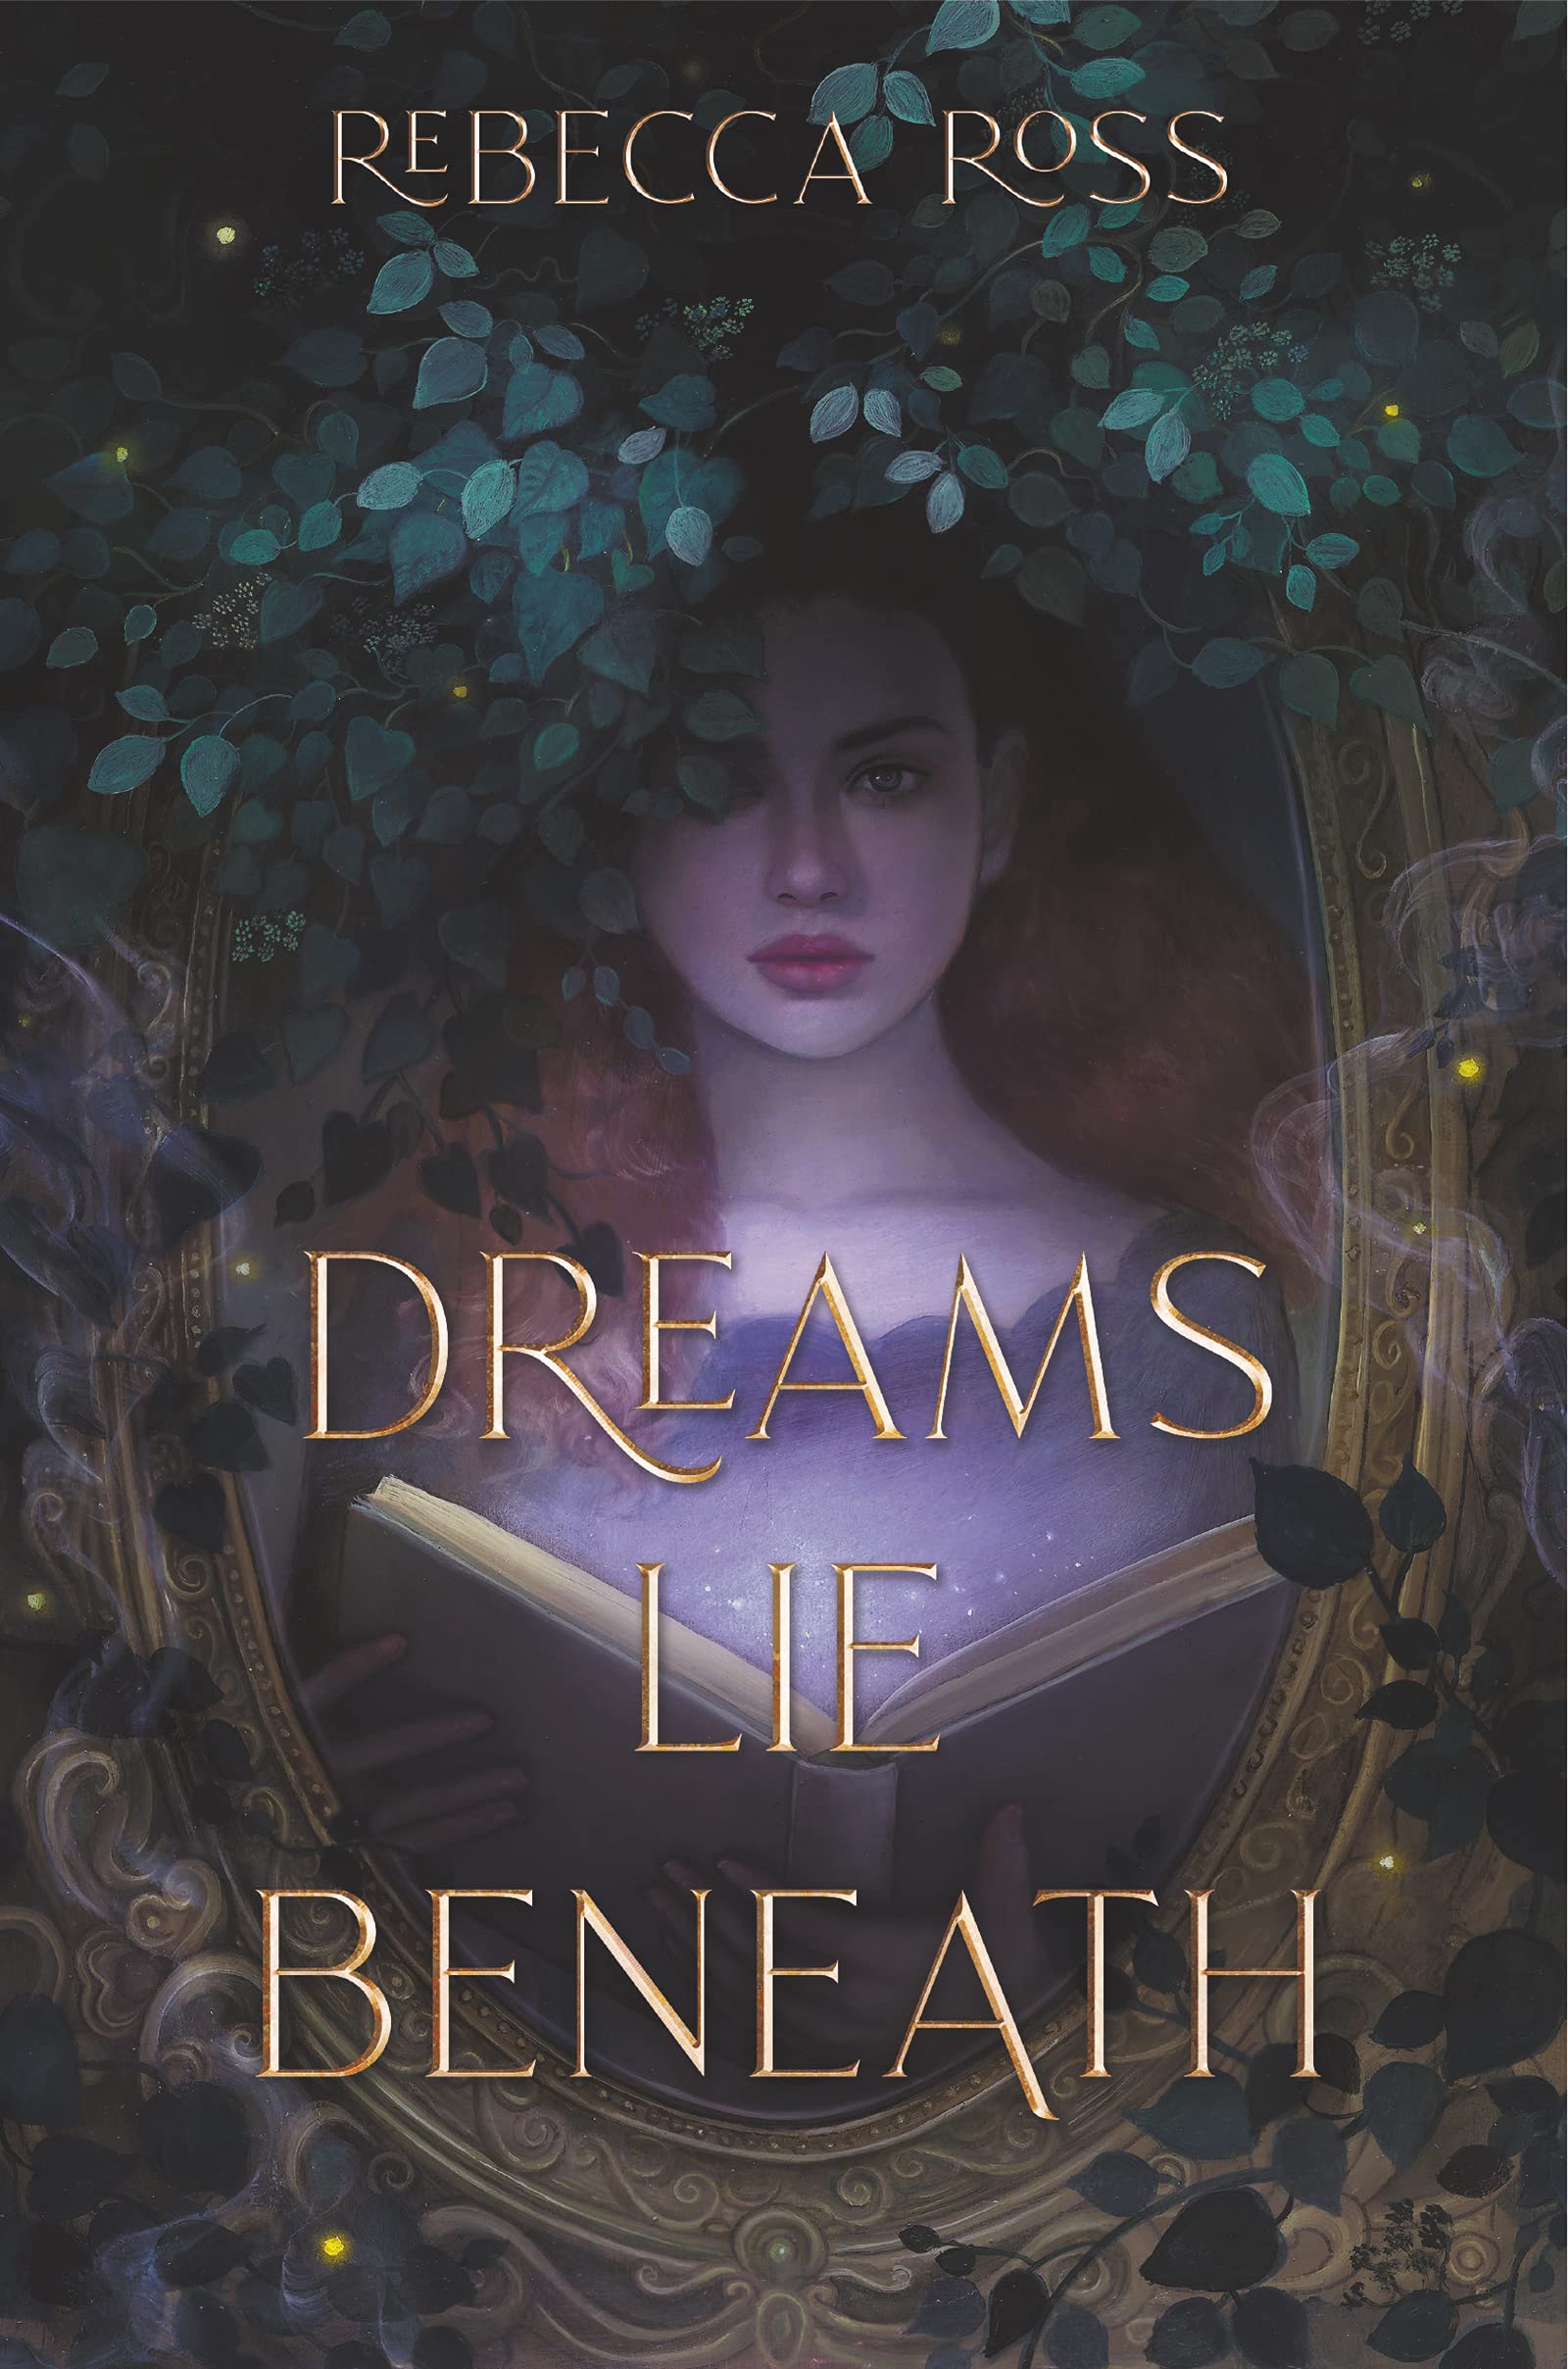 Cover of “Dreams Lie Beneath” by Rebecca Ross